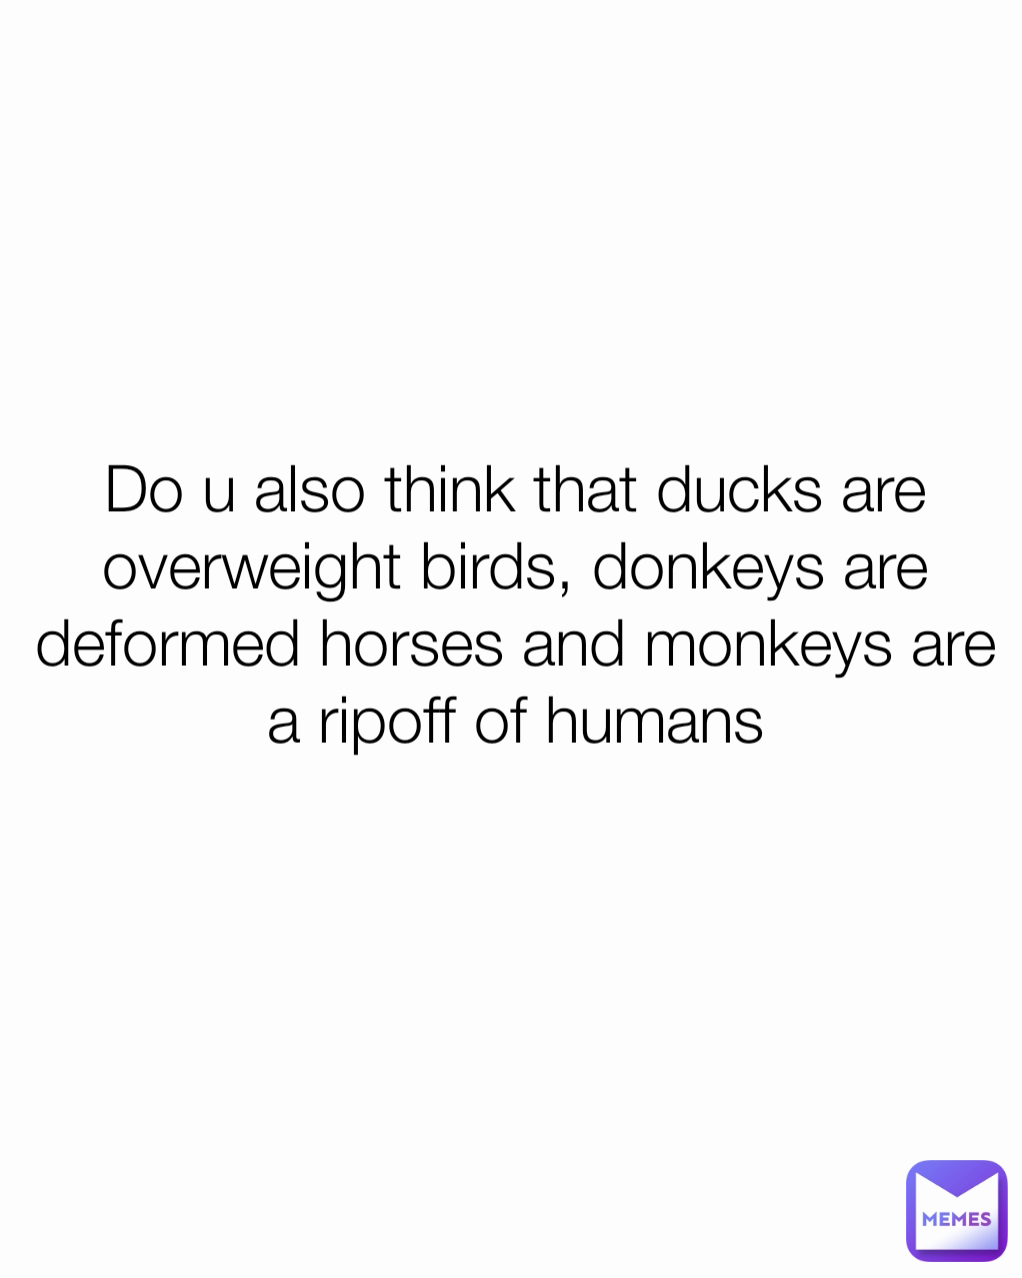 Do u also think that ducks are overweight birds, donkeys are deformed horses and monkeys are a ripoff of humans
